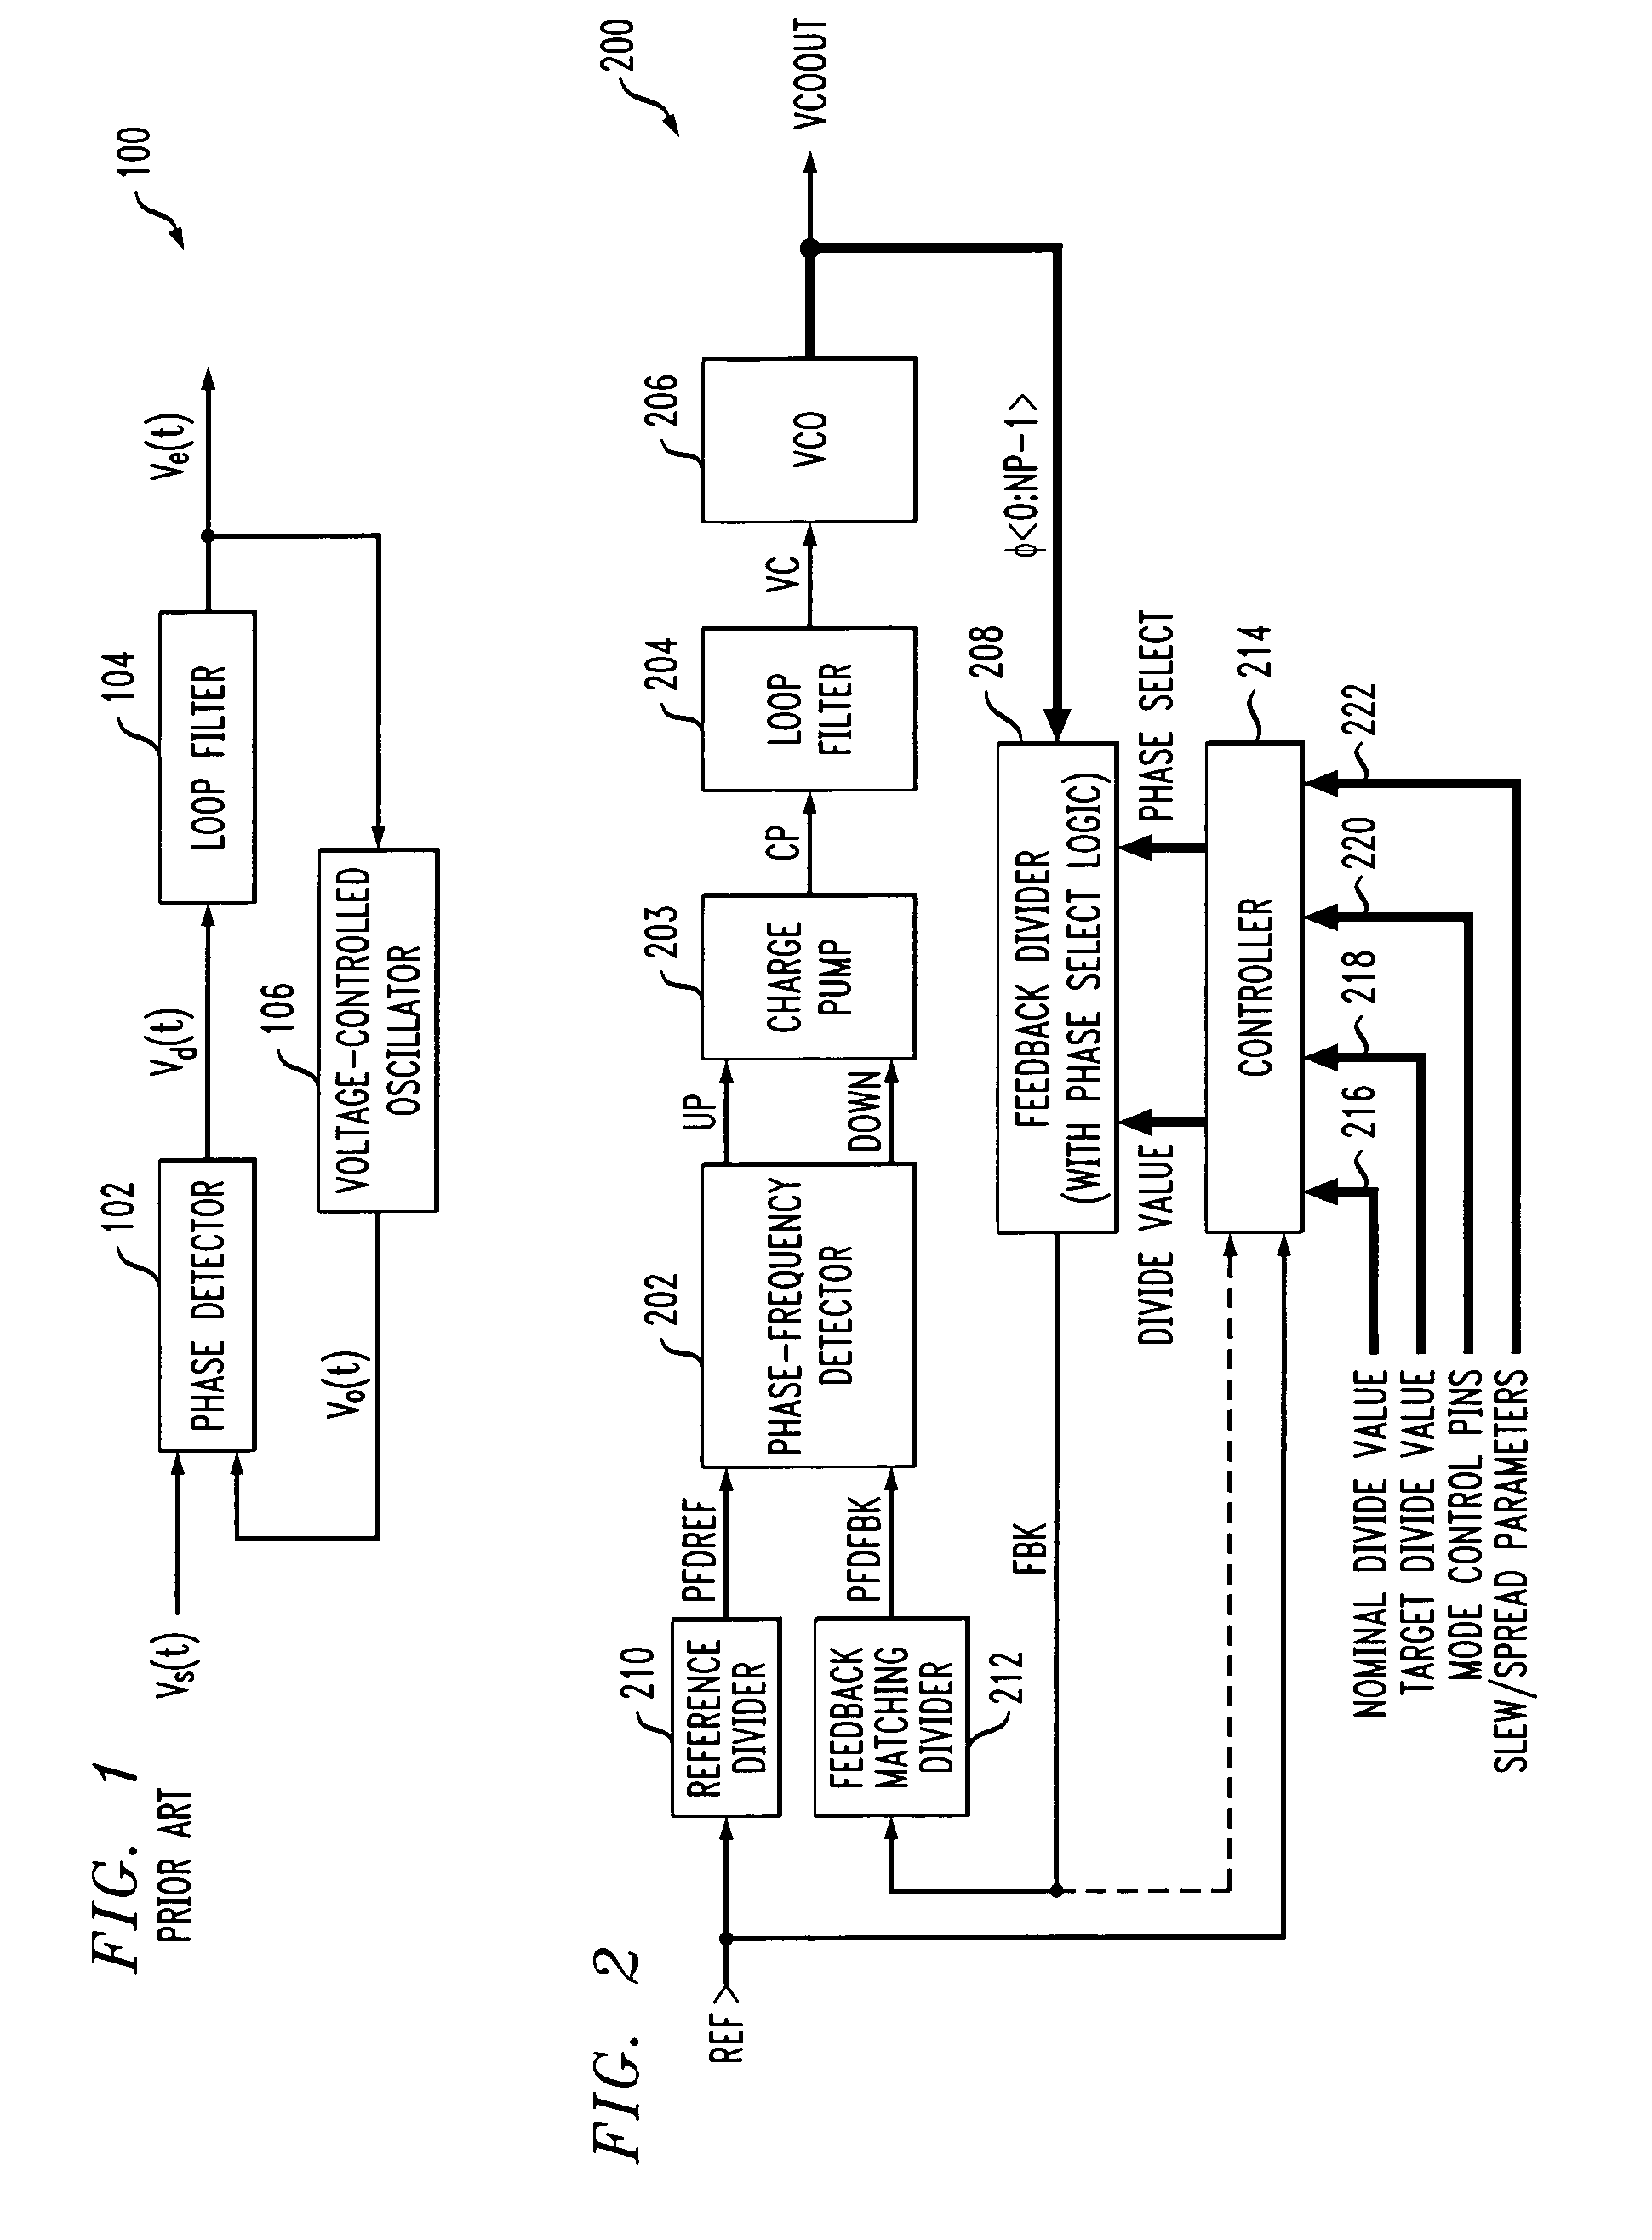 Signal generator with selectable mode control